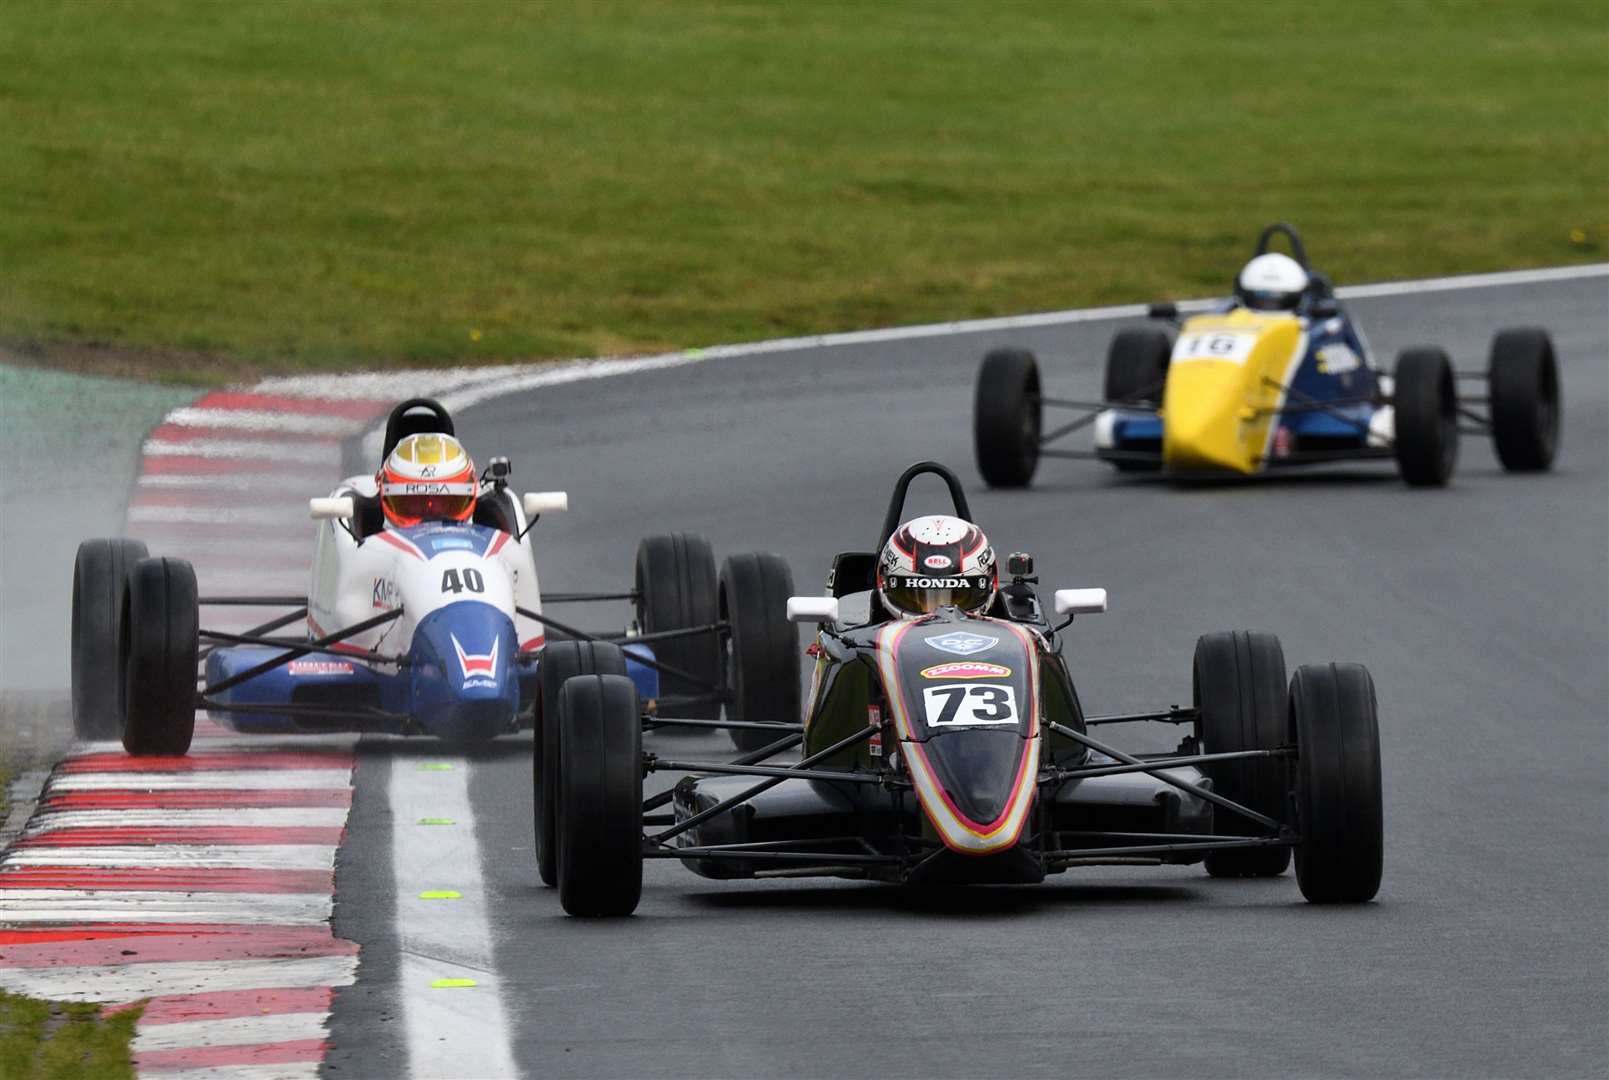 Romanek, who also claimed the Champion of Brands title this season, leads Andrew Rackstraw and Jacob Tofts through Graham Hill Bend. Picture: Simon Hildrew